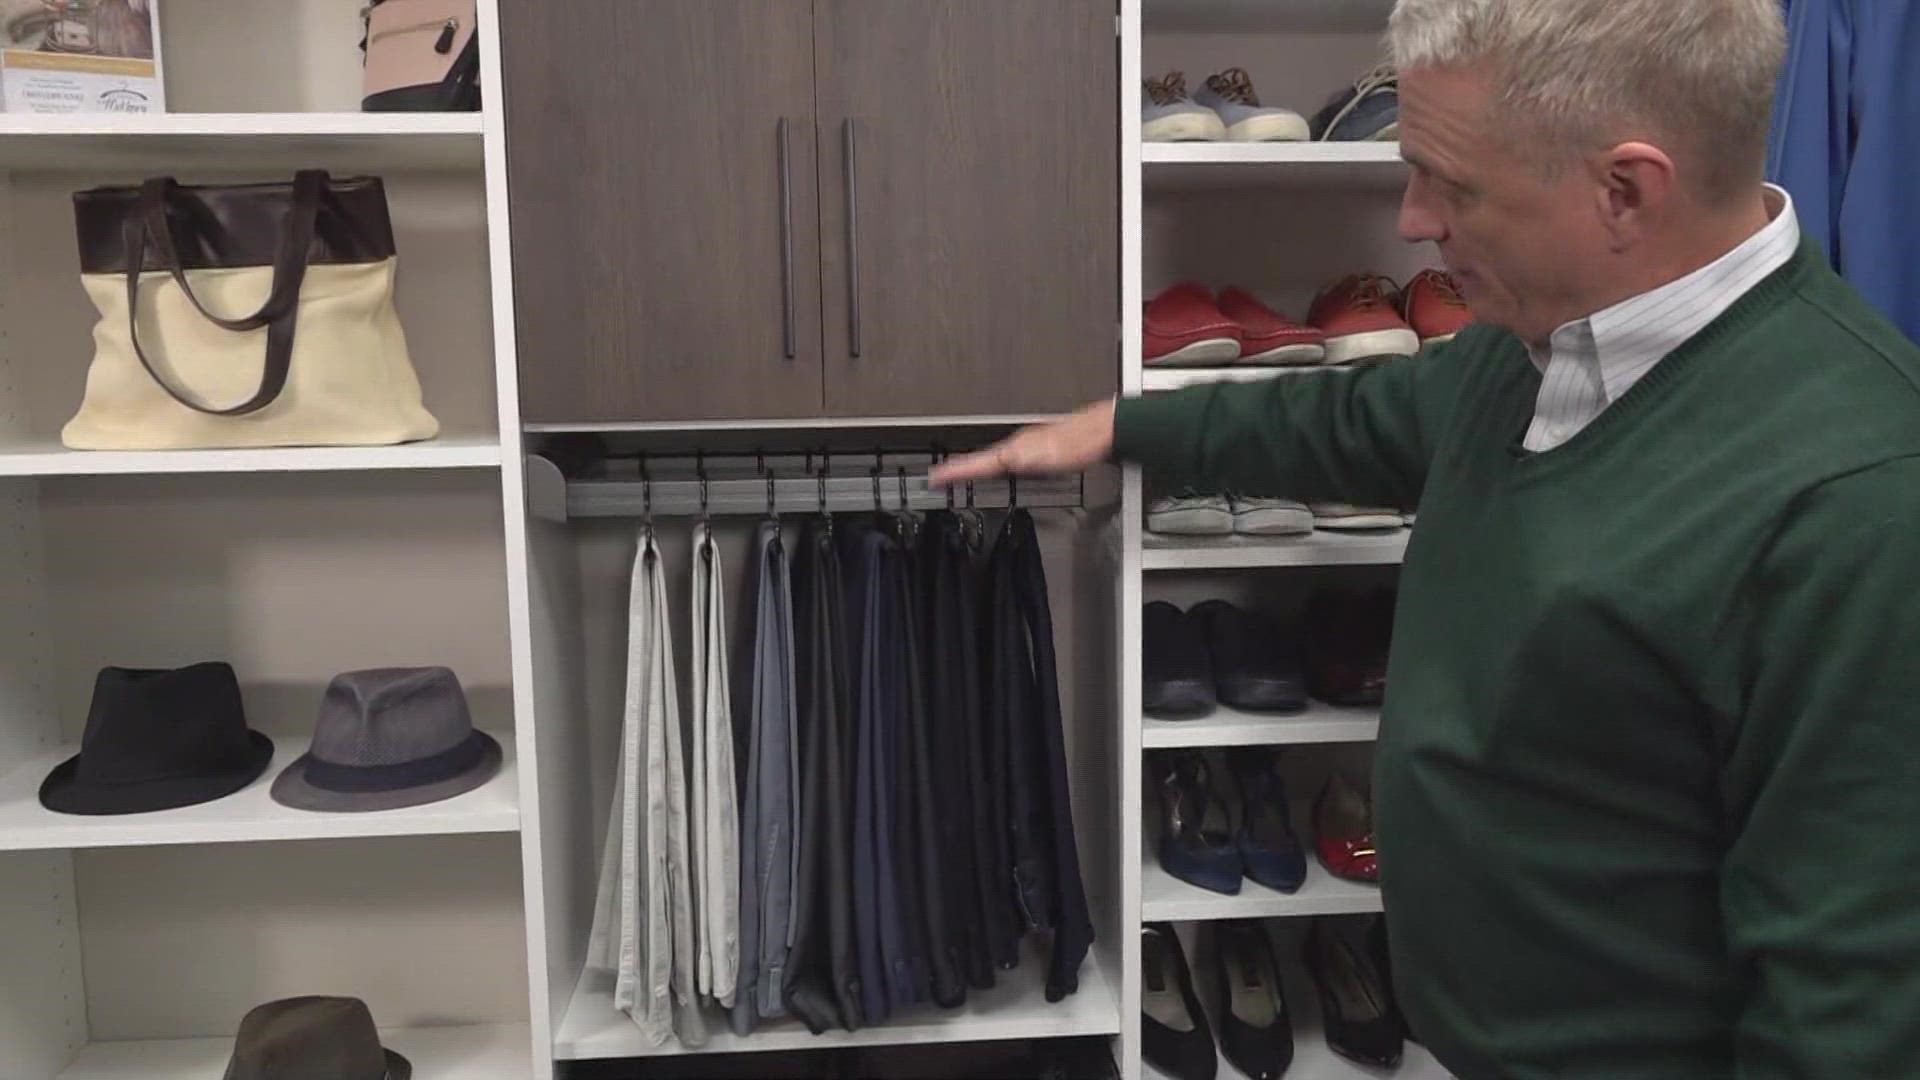 Chris McKenry, the owner of Closets by McKenry, shares some easy-to-follow organization tips.